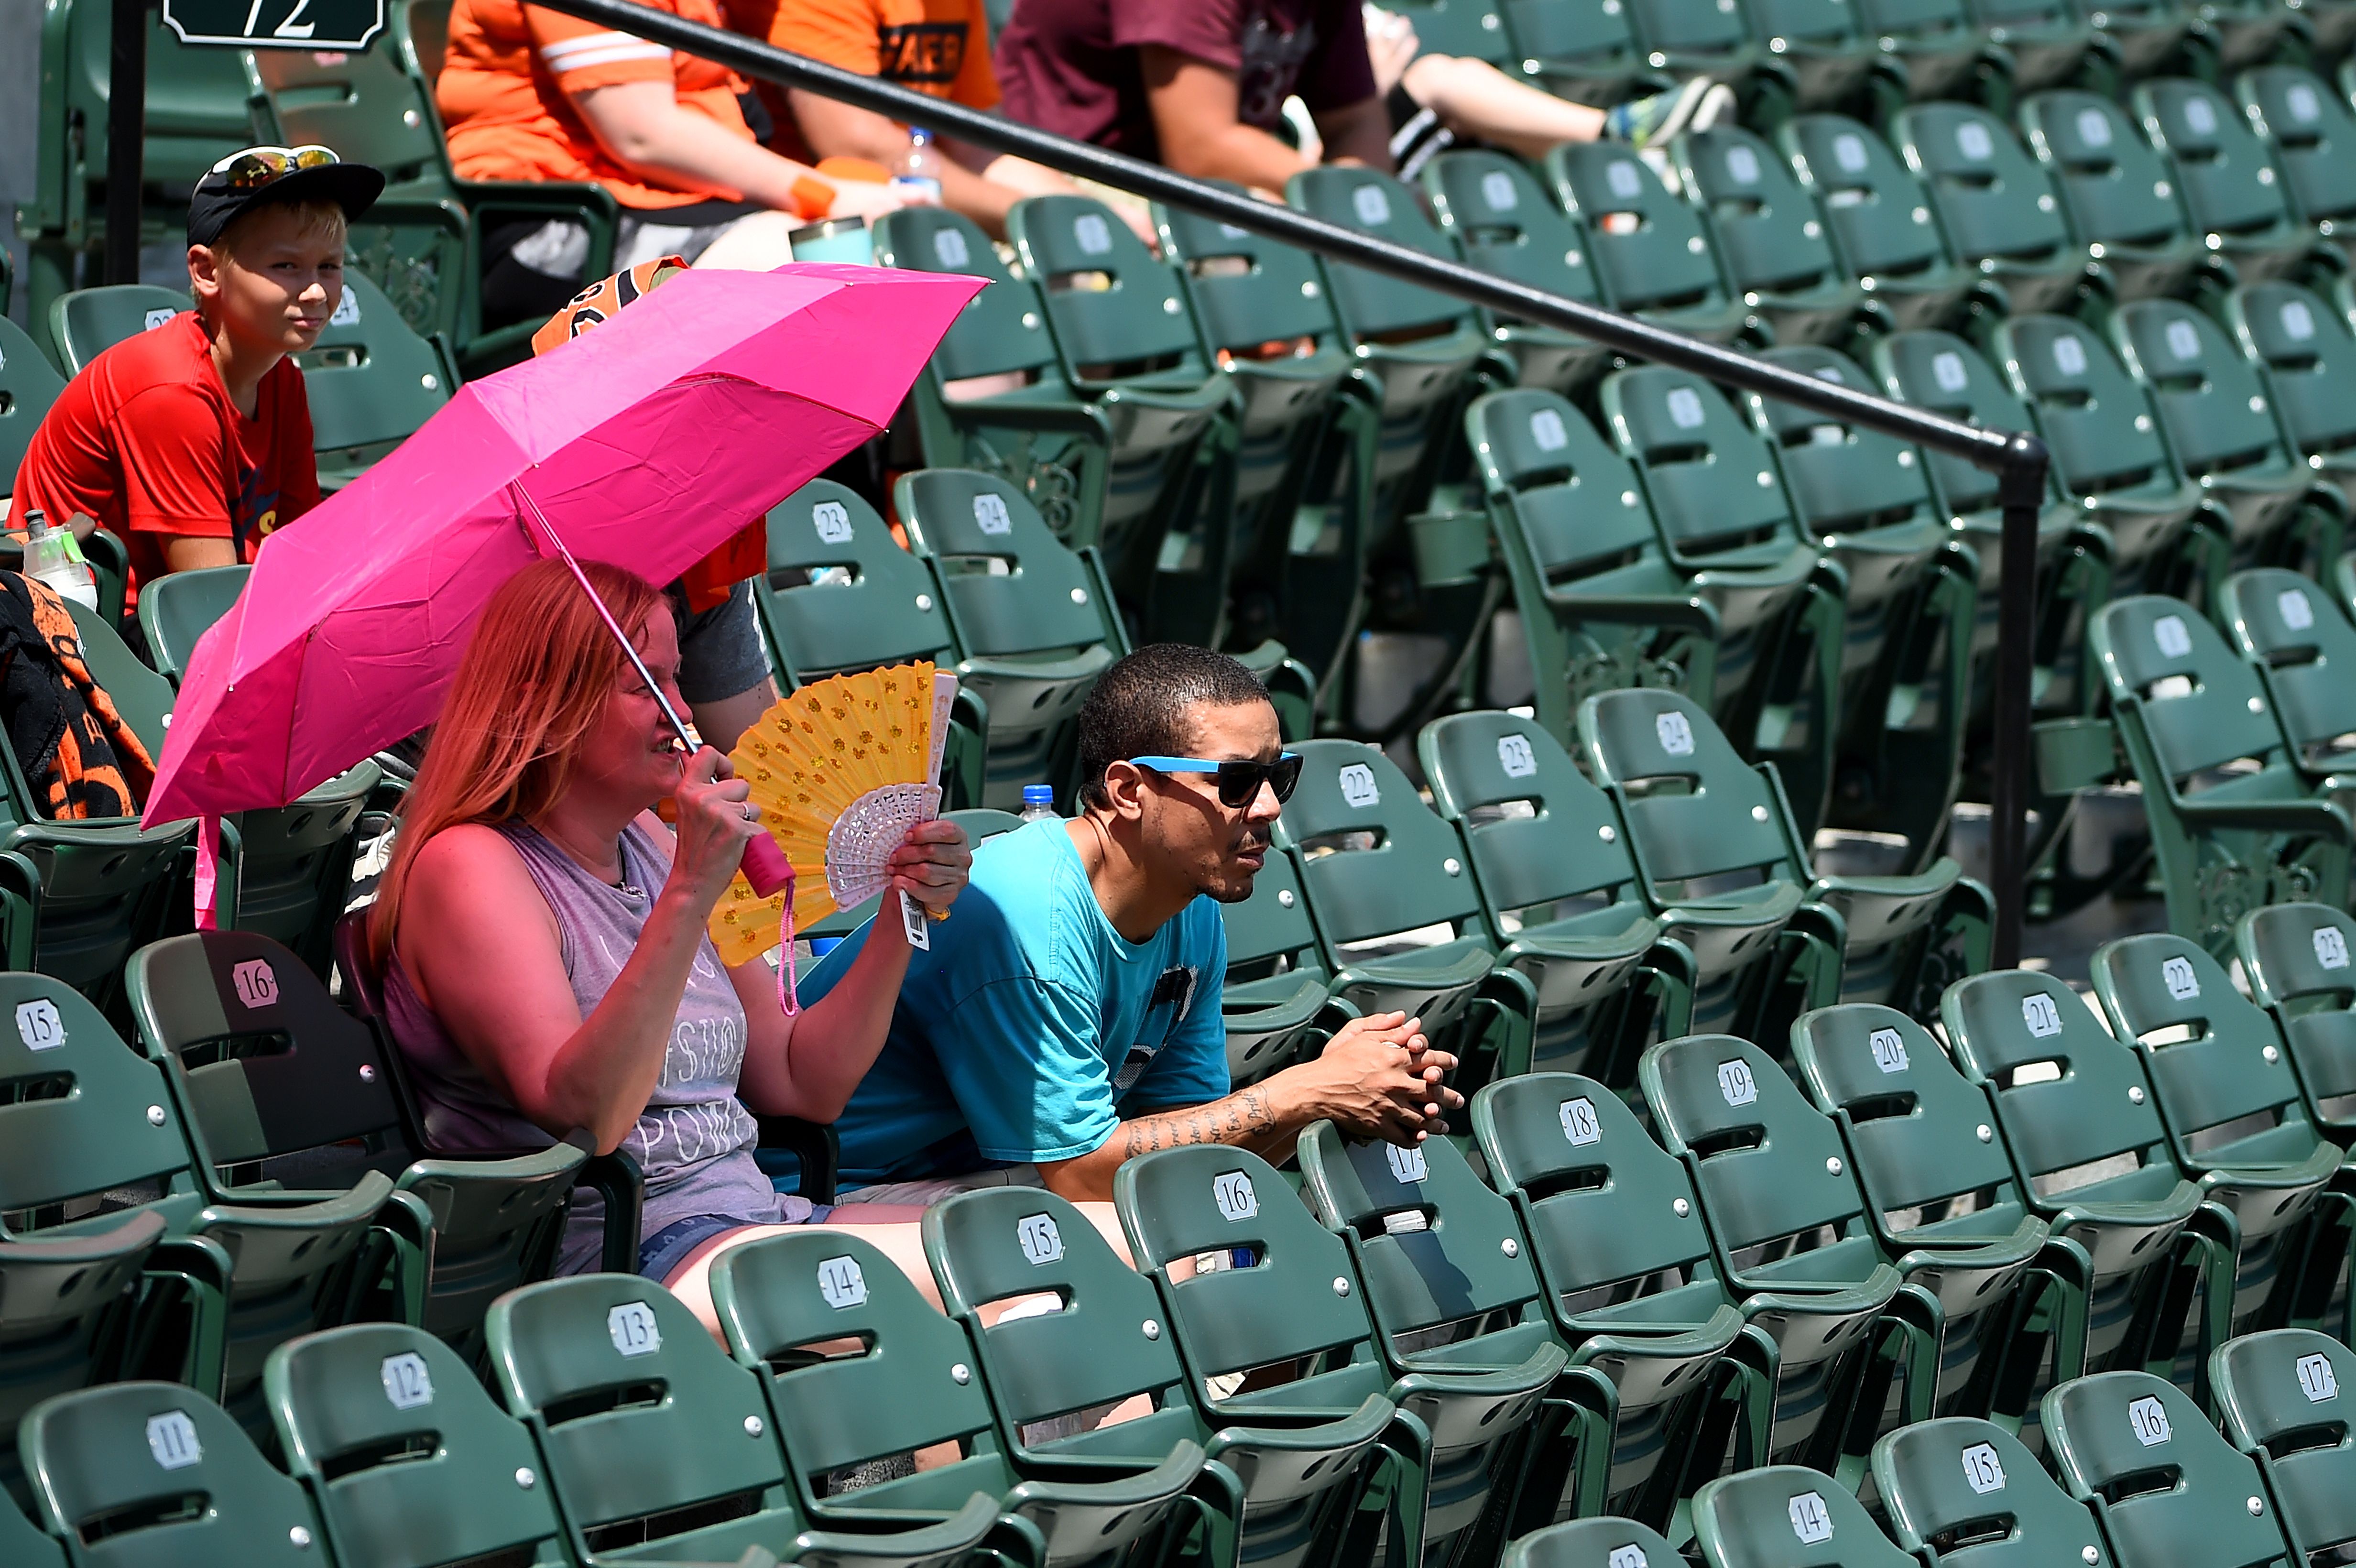 Fans try to cool off under an umbrella during the game between the Baltimore Orioles and the Boston Red Sox at Oriole Park at Camden Yards on July 21, 2019 in Baltimore, Maryland.